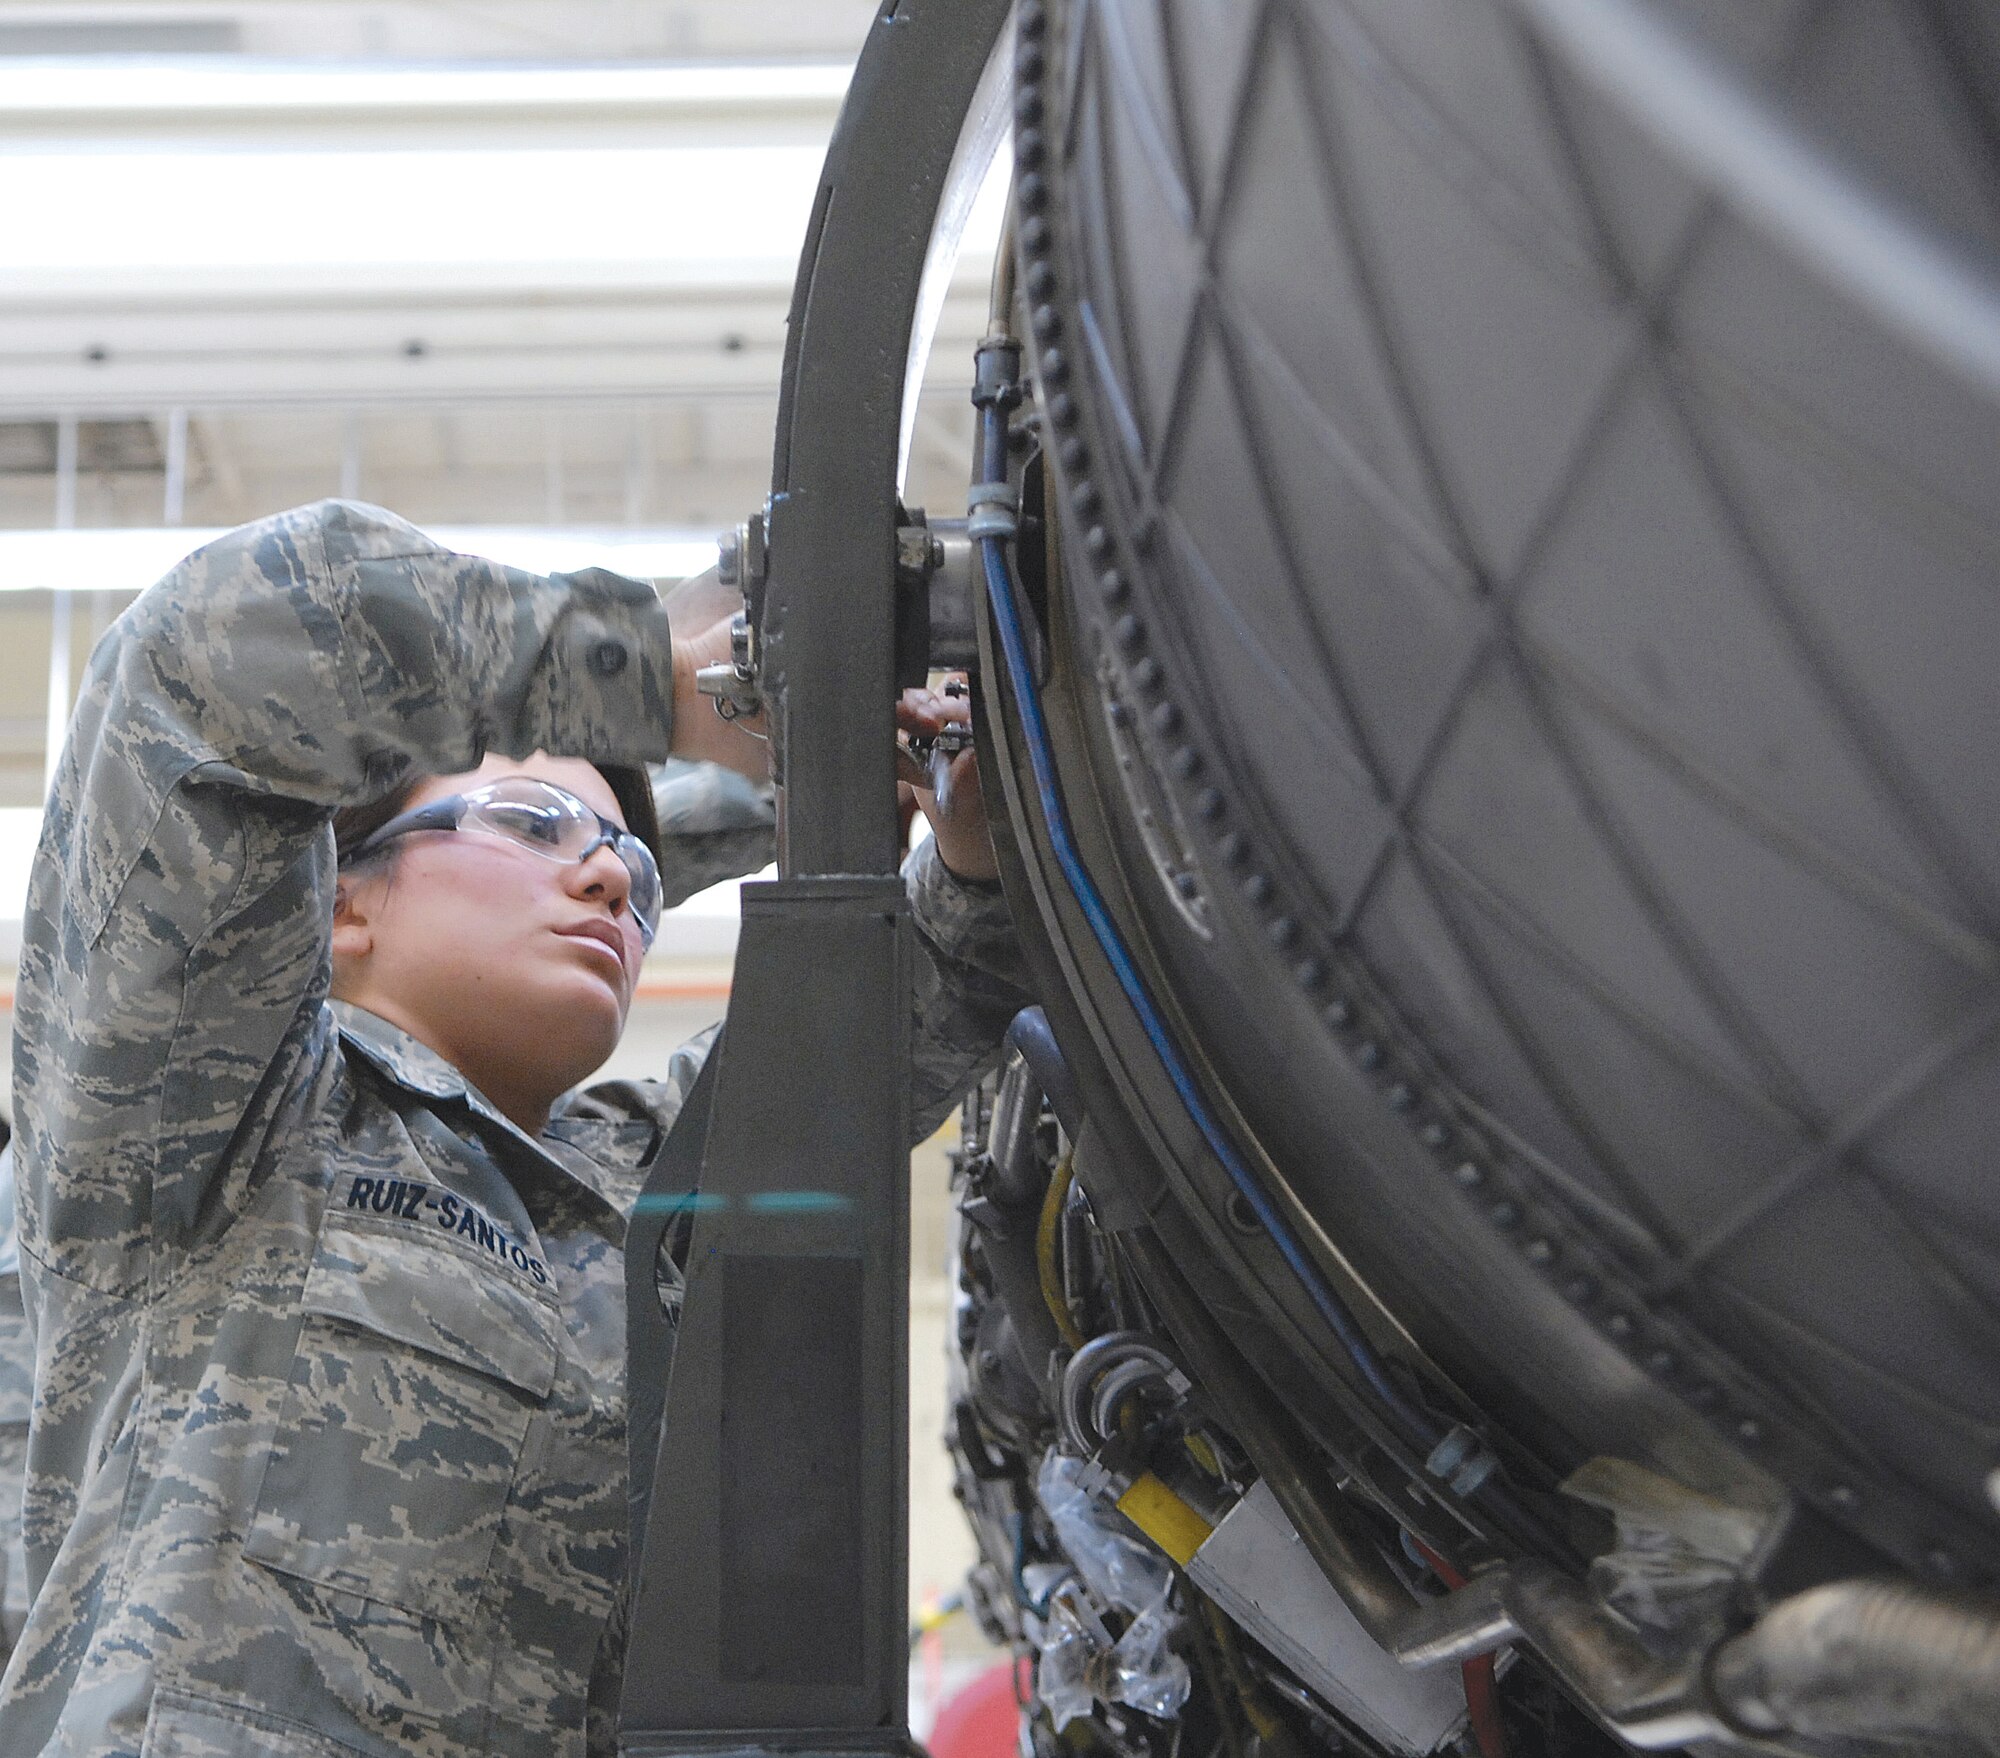 Airman 1st Class Jacqueline Ruiz-Santos, 56th Component Maintenance Squadron aerospace propulsion specialist, tightens coke bottle mounts on a jet engine prior to an engine transfer in the jet engine intermediate maintenance shop January 12. In JEIM the engine comes in from the line to be fixed. (U.S. Air Force photo by SSgt Phillip Butterfield) 